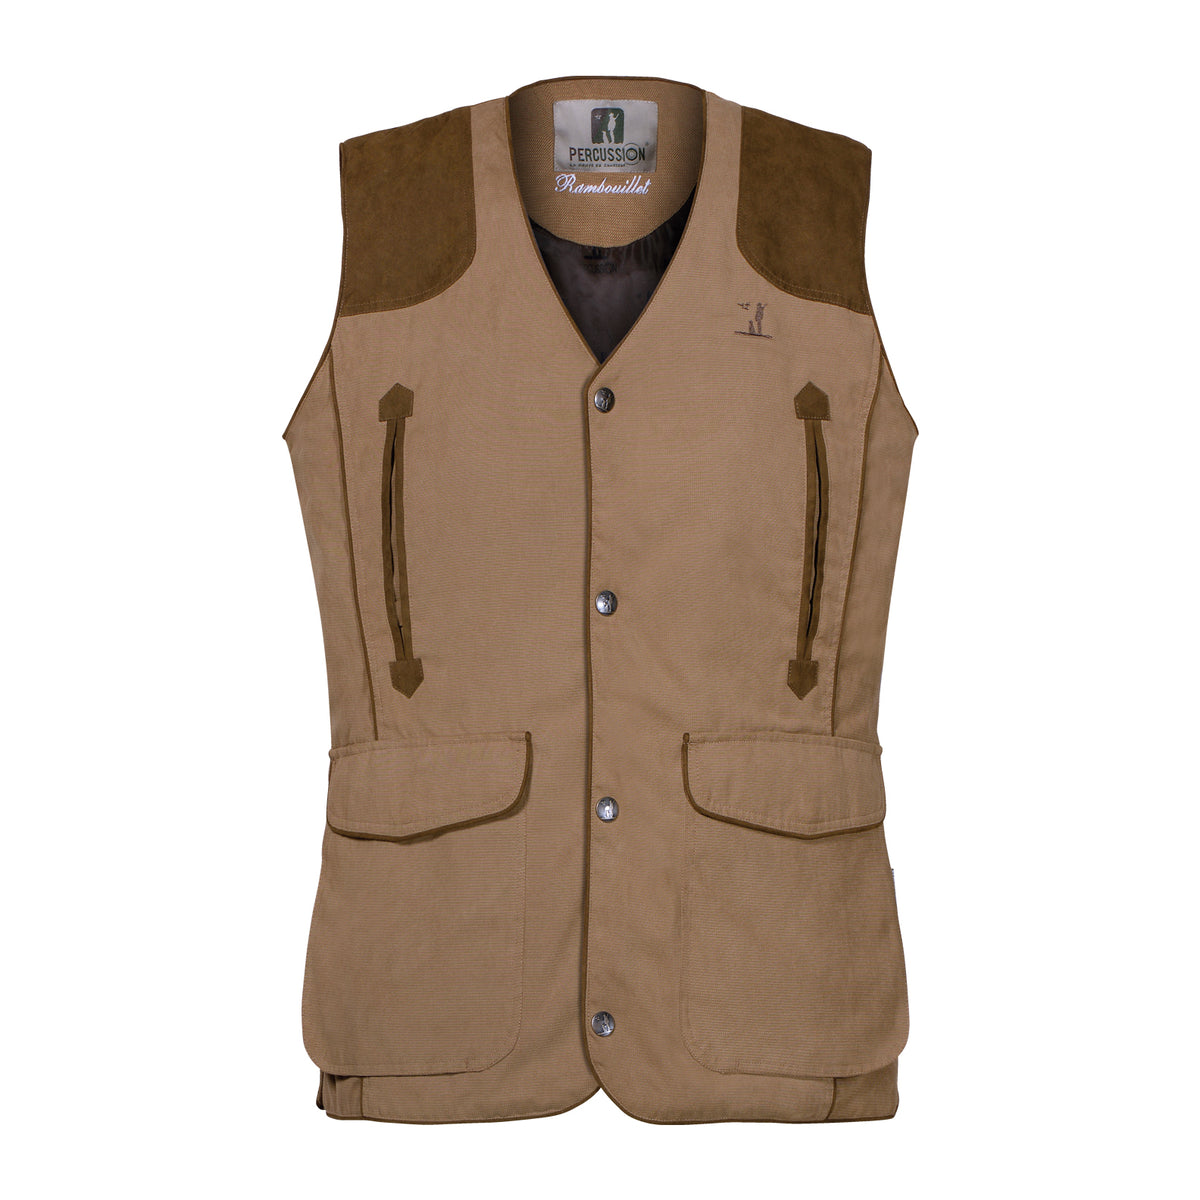 Percussion Rambouillet Original Waistcoat | Percussion – New Forest ...